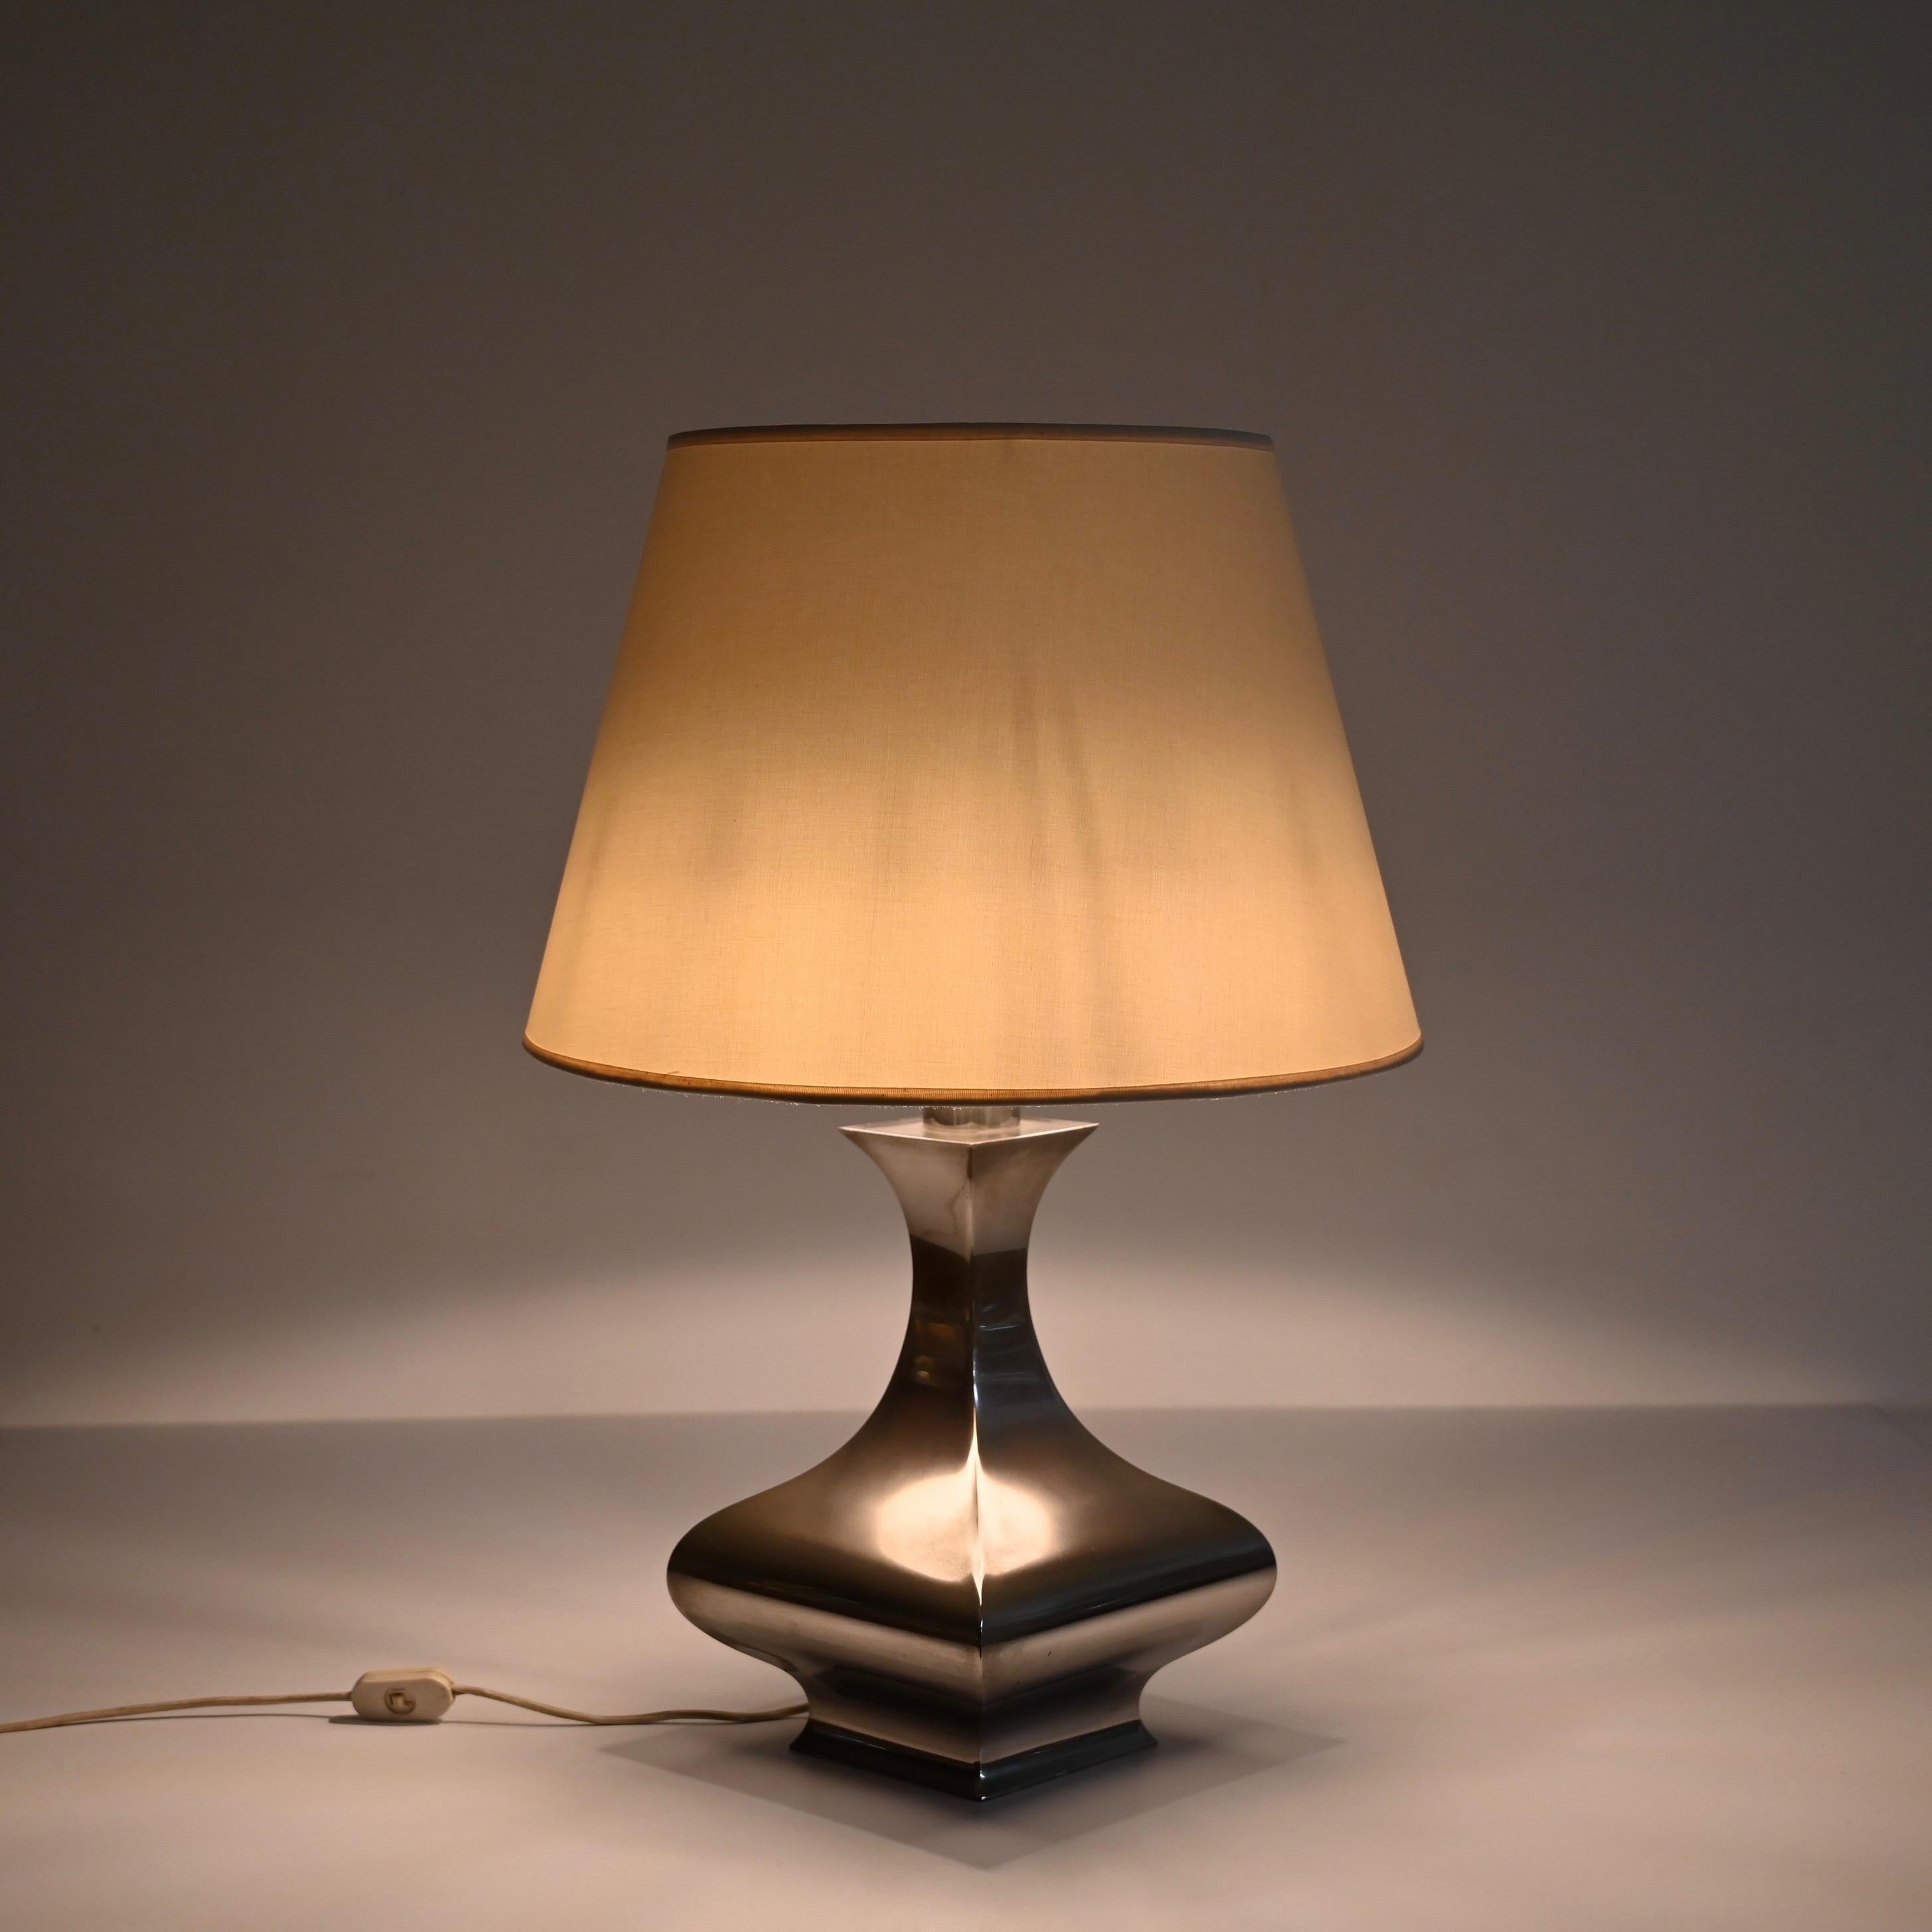 Late 20th Century Mid-Century Polished Stainless Steel Table Lamp by Maria Pergay, France 1970s